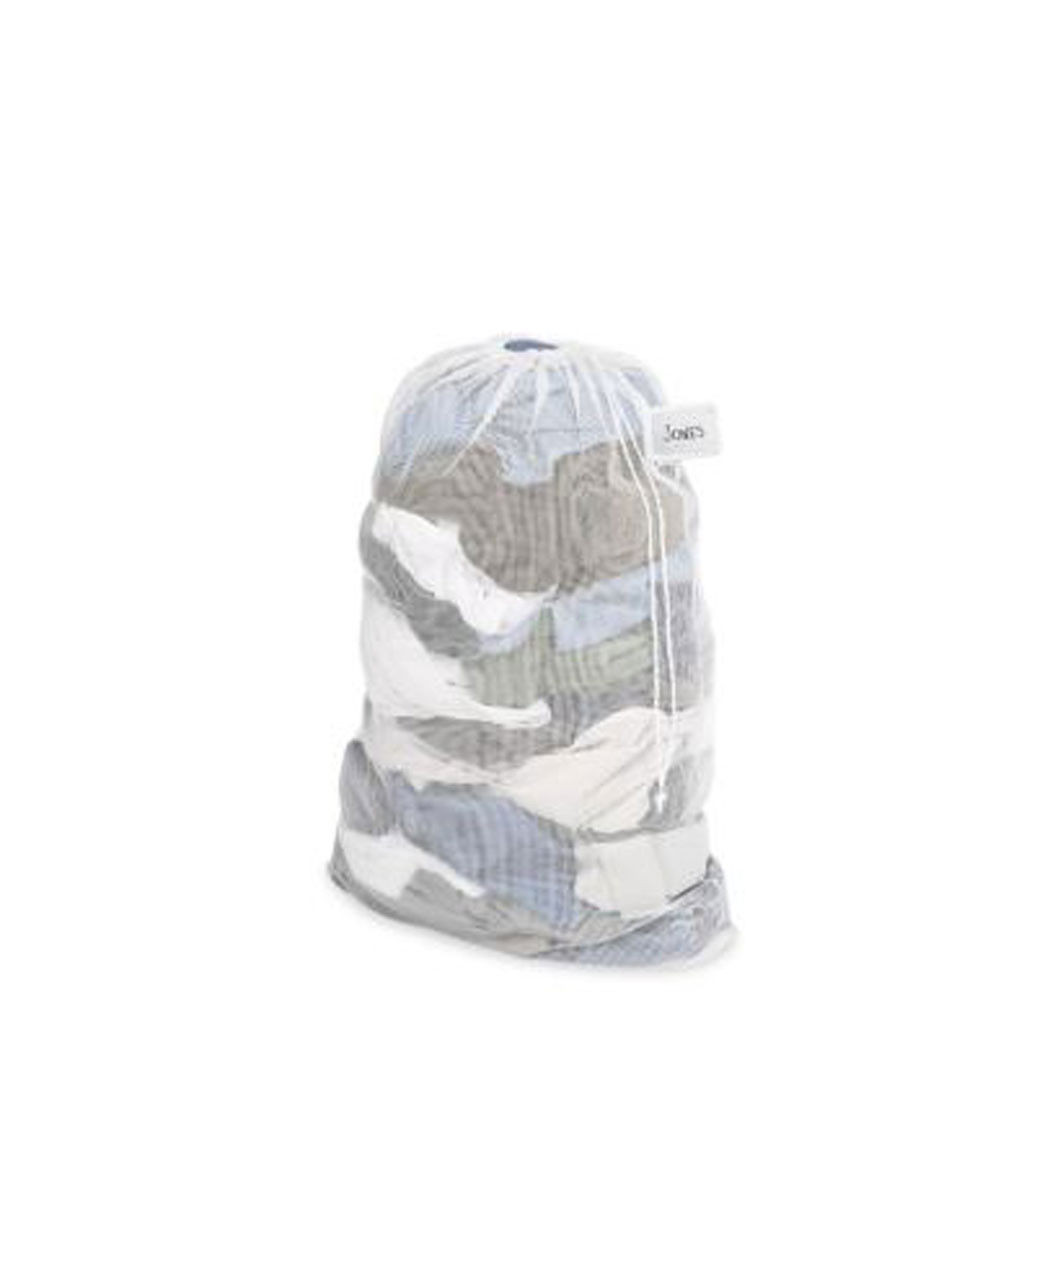 Mesh Laundry Bags With Drawstring And ID Tag Questions & Answers